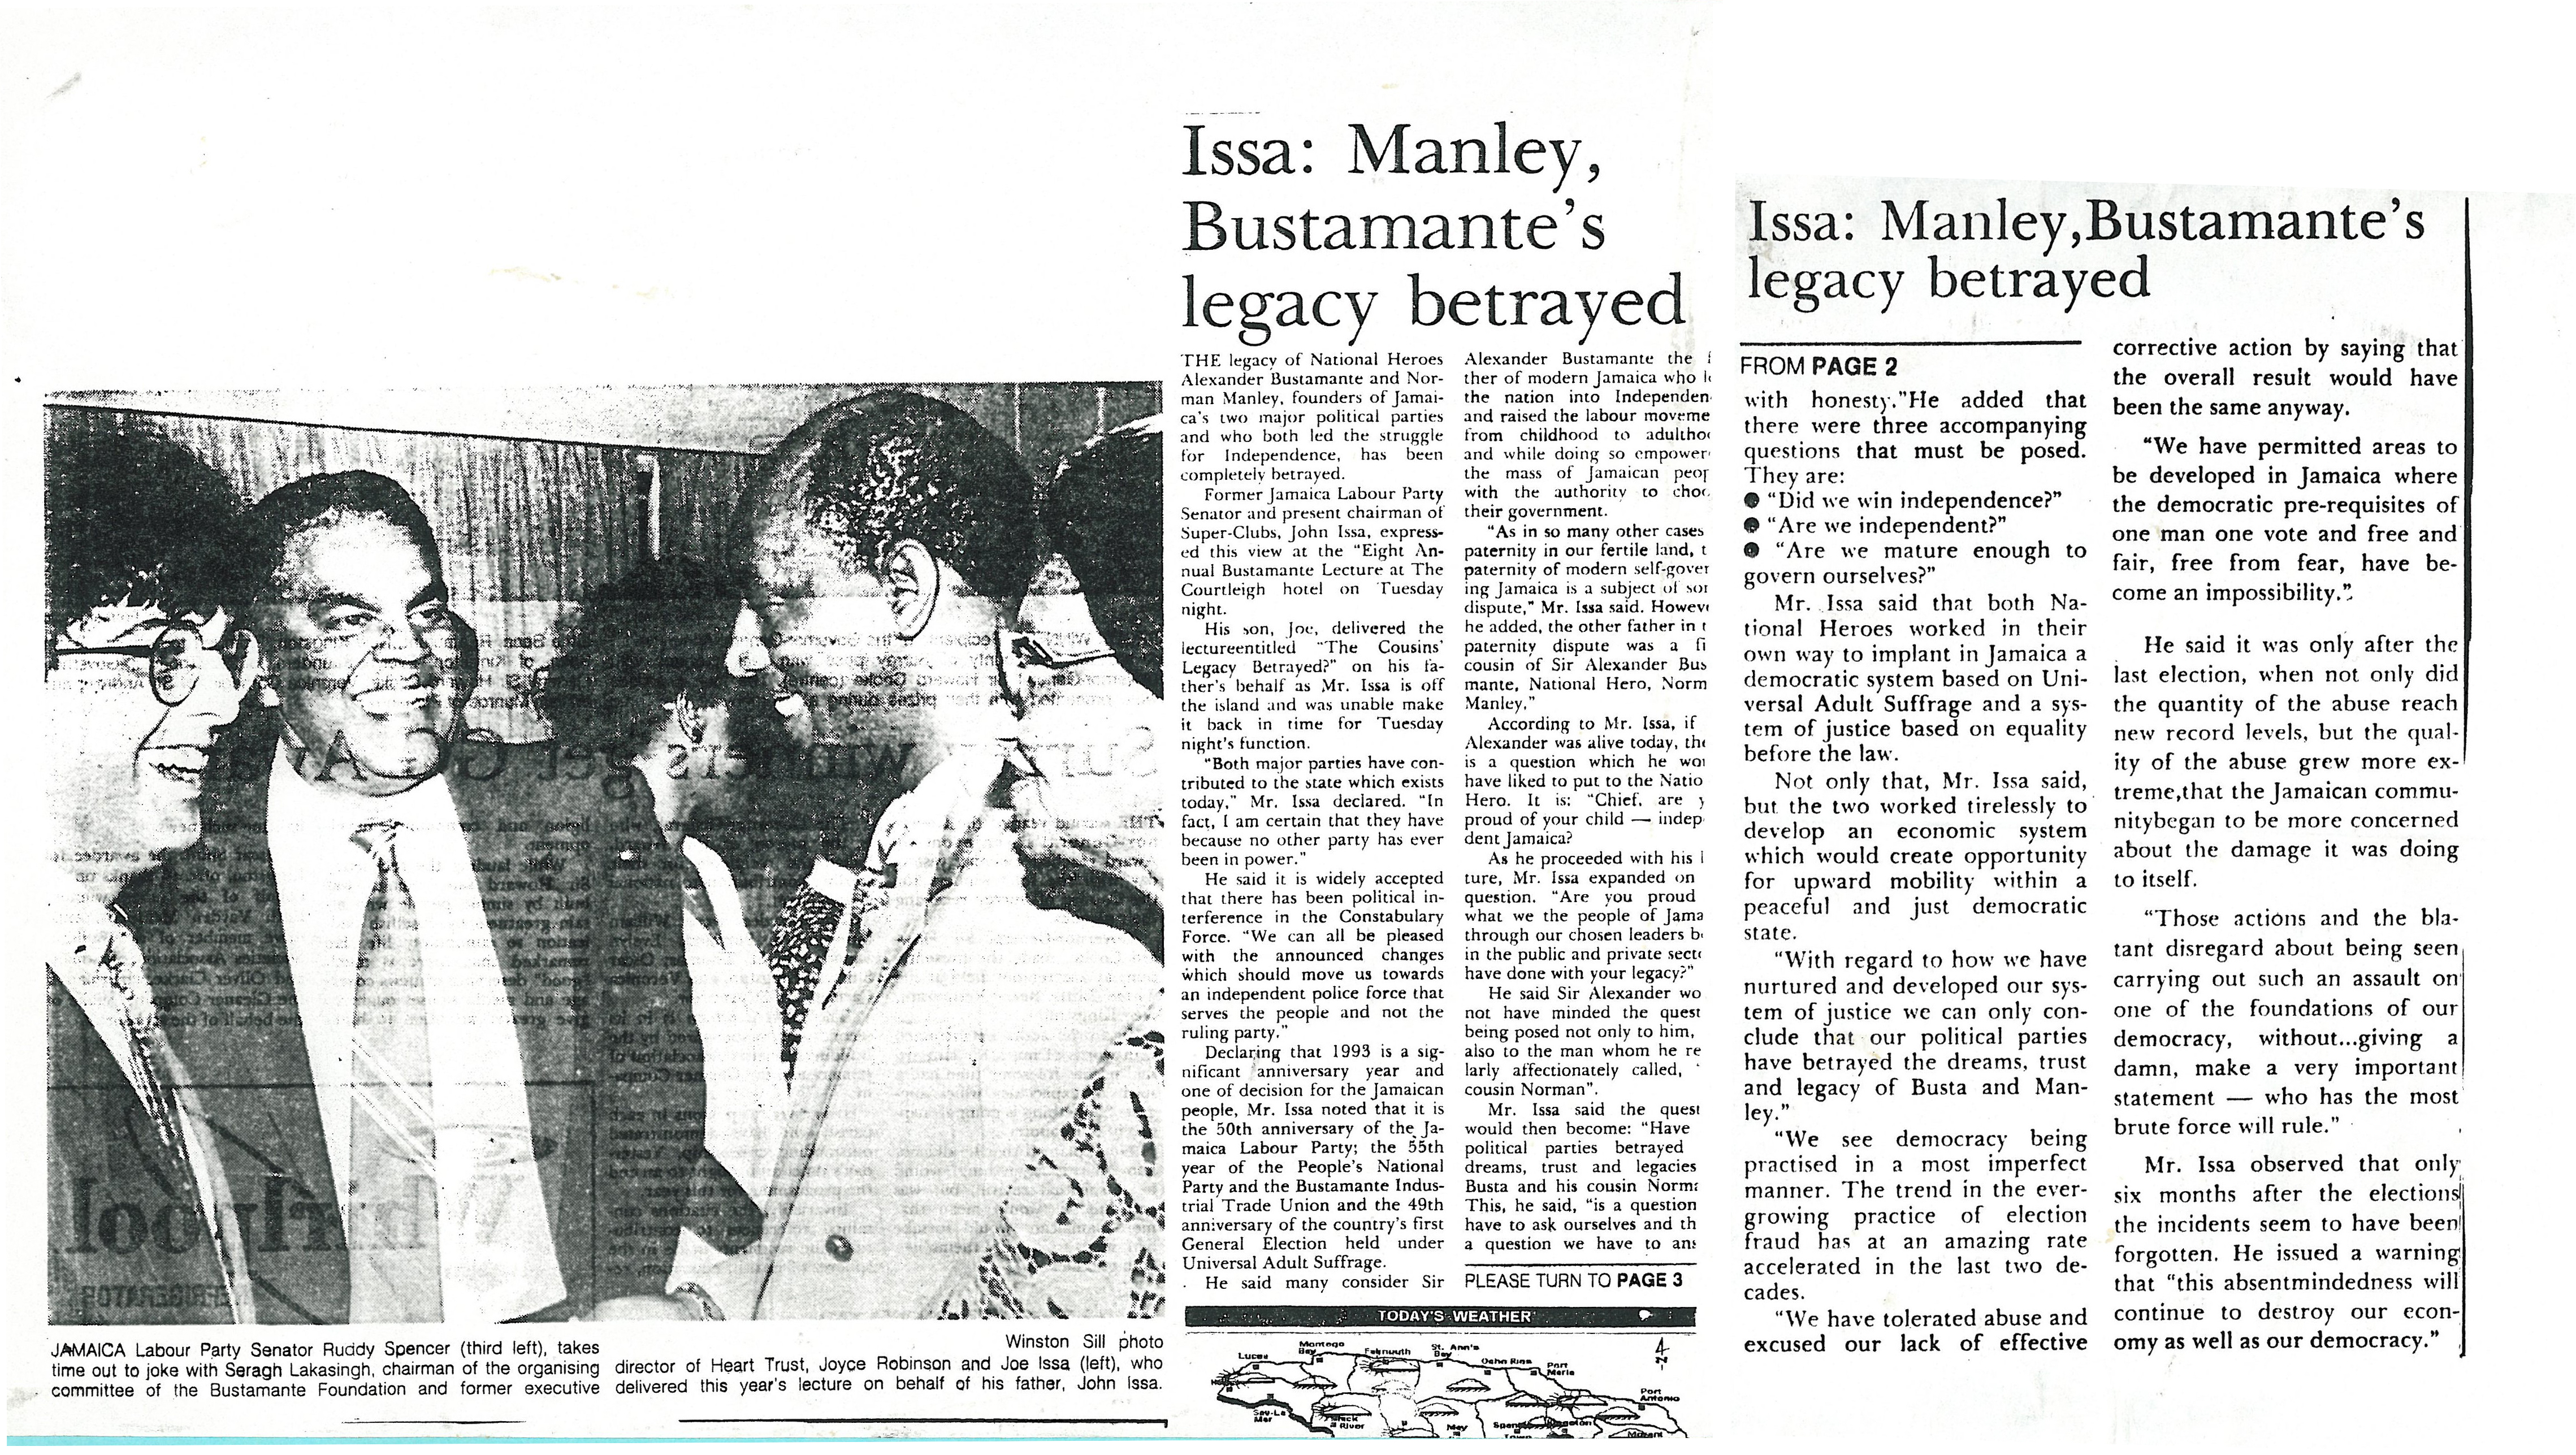 Issa: Manley, Bustamante's Legacy betrayed